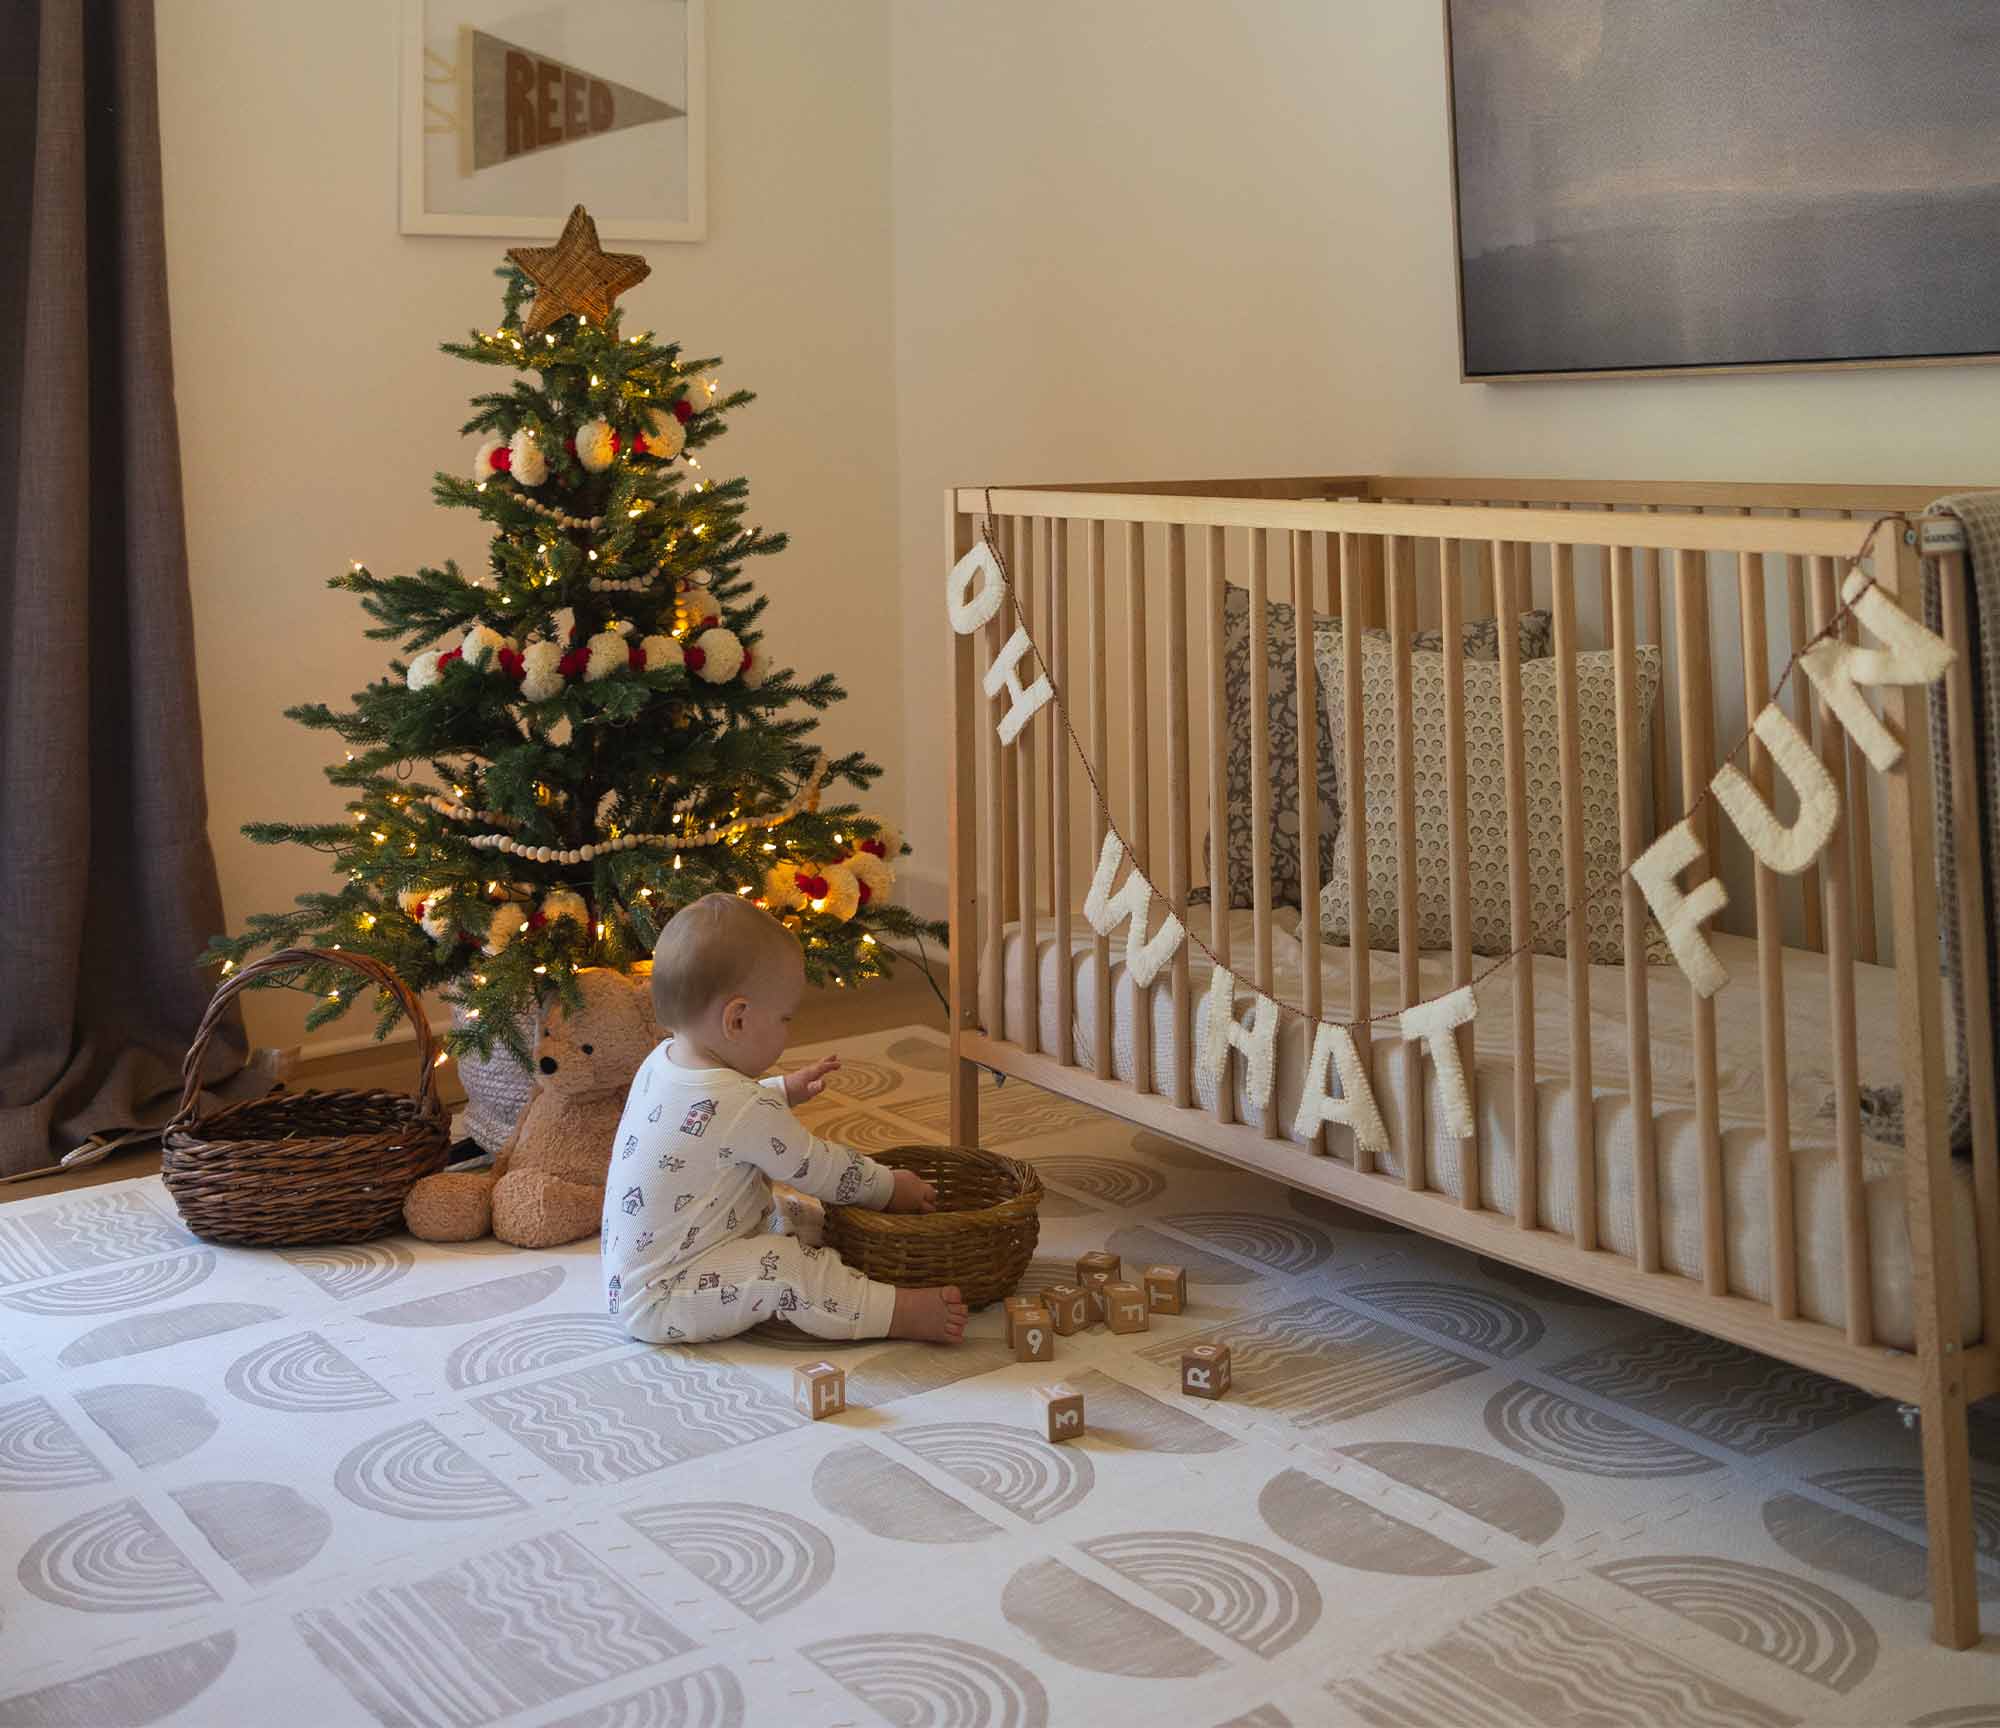 Ada Pebble white and tan geometric print play mat shown in a nursery with baby playing on the mat in front of a christmas tree and crib with an "oh what fun" banner strung across